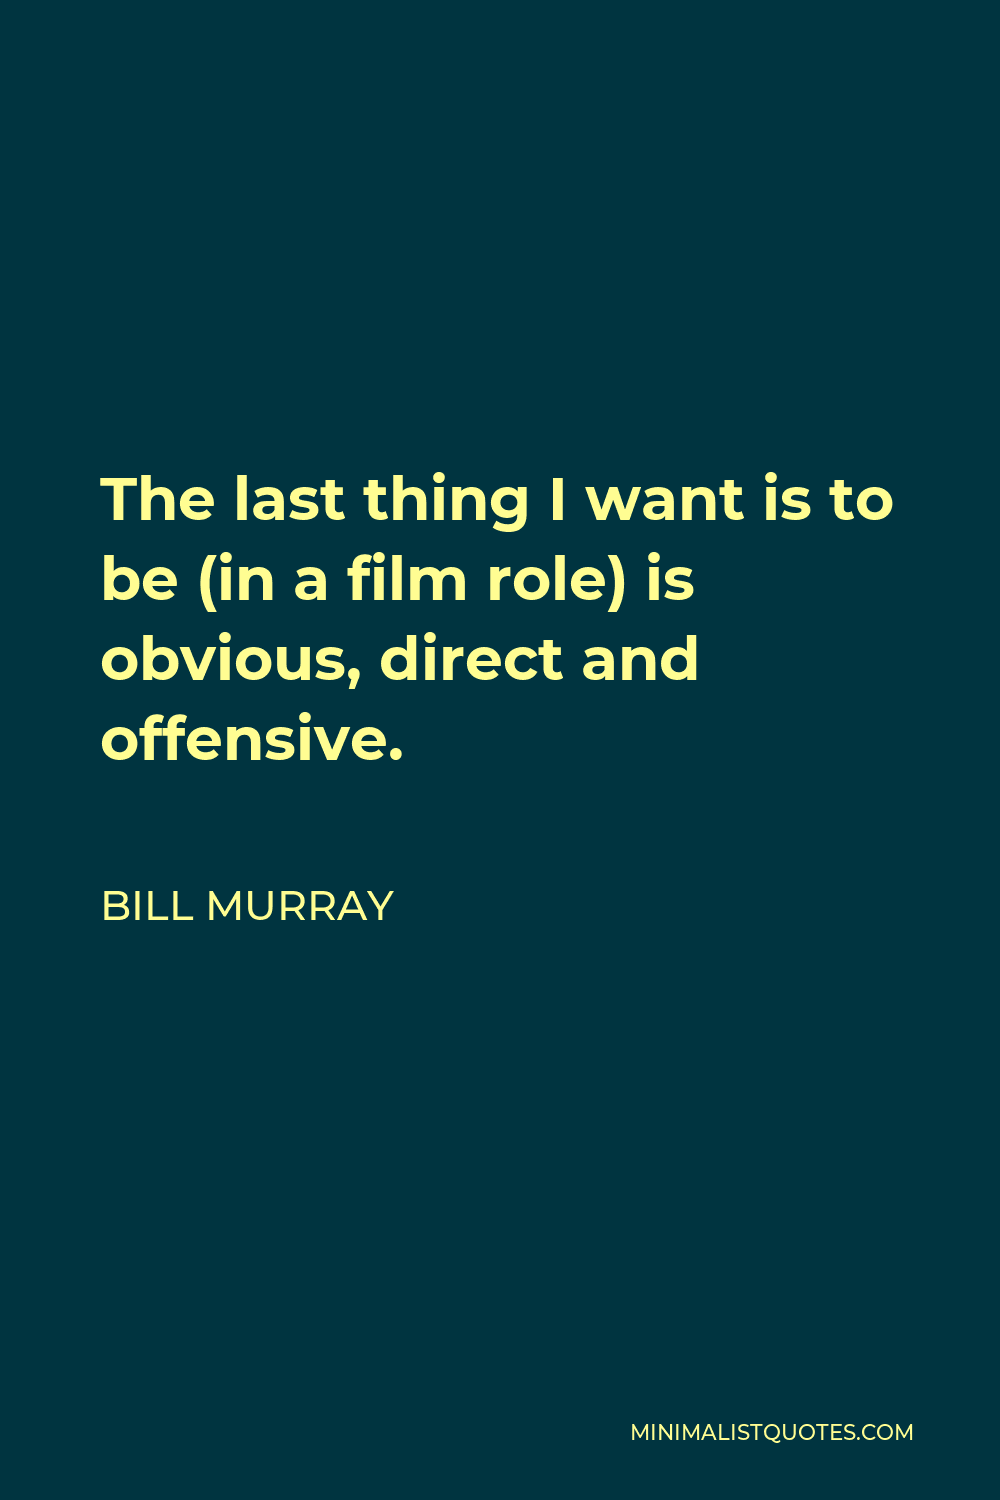 Bill Murray Quote - The last thing I want is to be (in a film role) is obvious, direct and offensive.